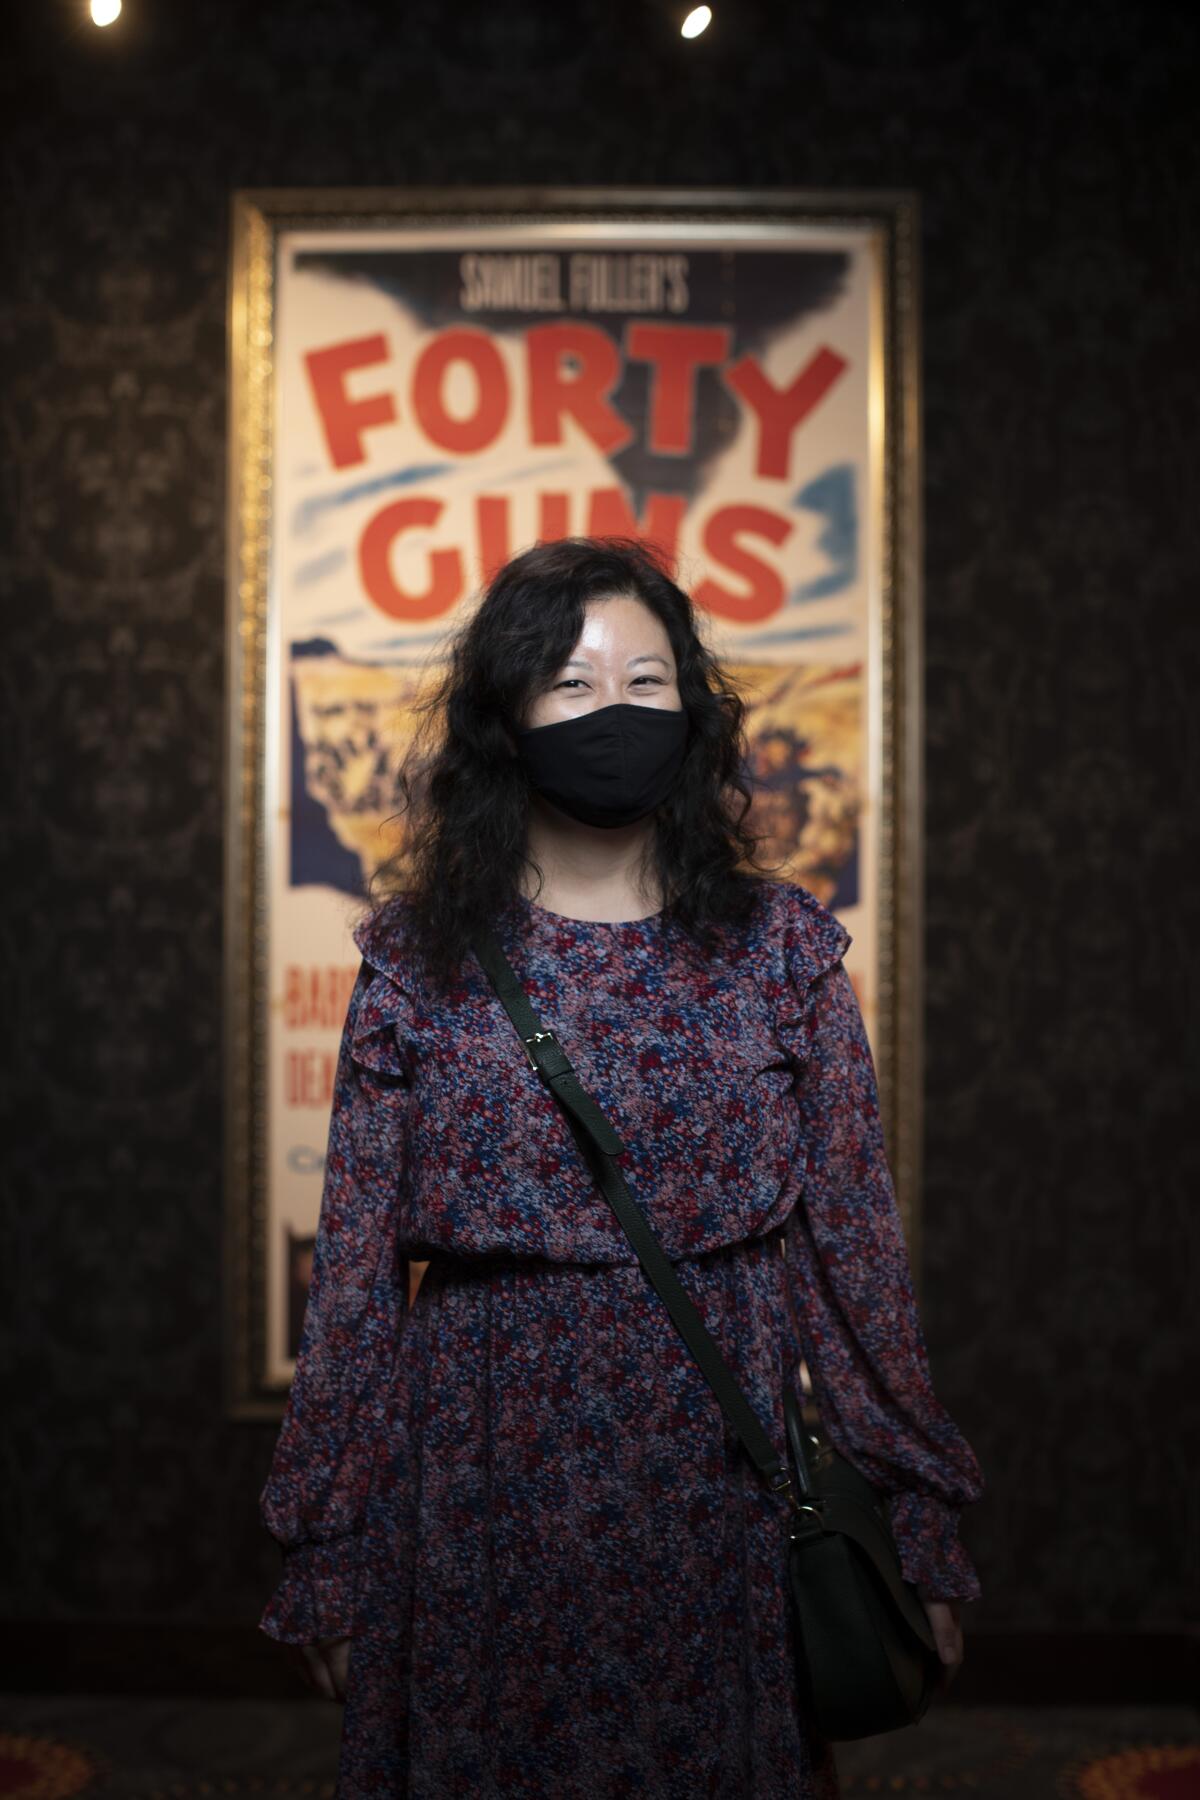 A woman in a mask and patterned dress stands in front of a "Forty Guns" movie poster